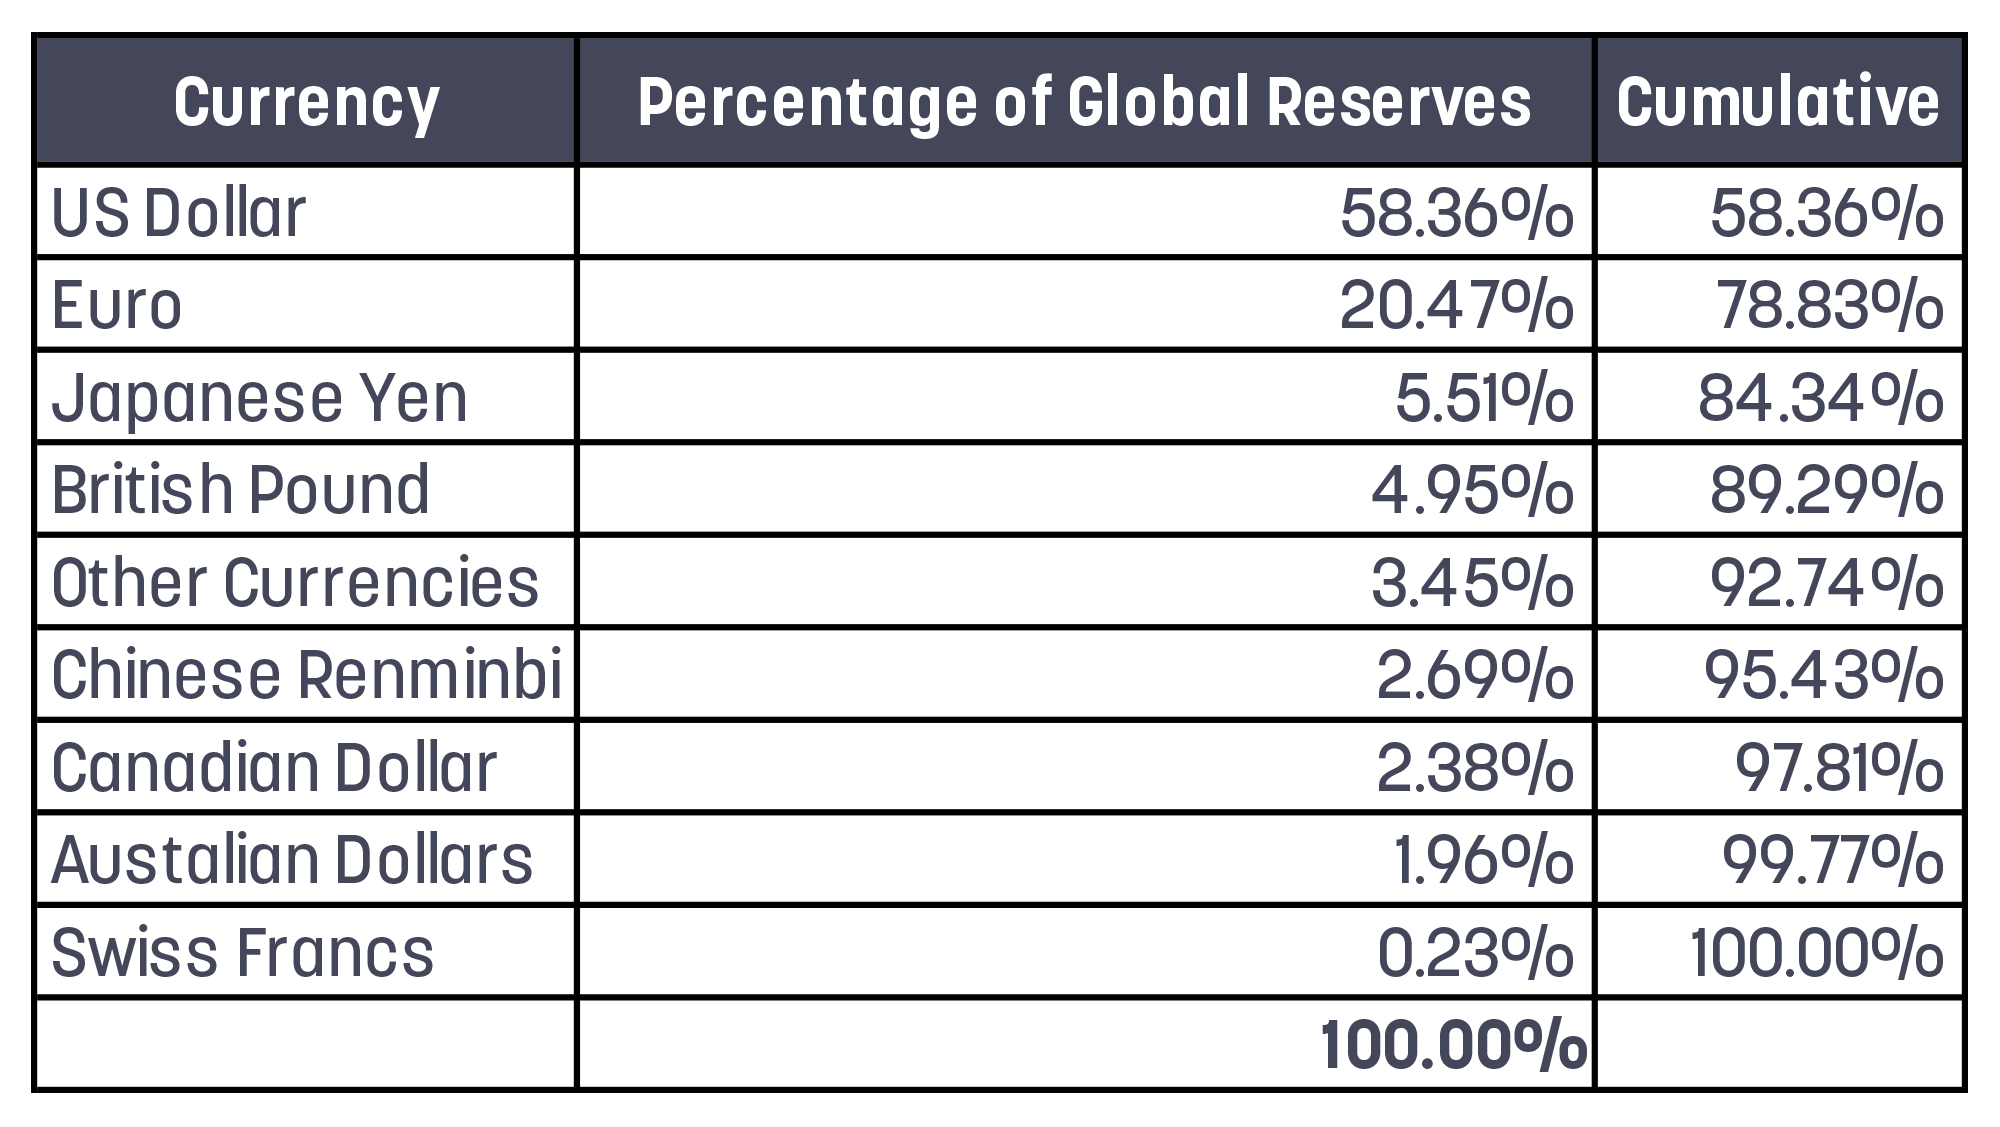 Exhibit 3: Global Currency Reserves, Q4 2022 (Source: International Monetary Fund)